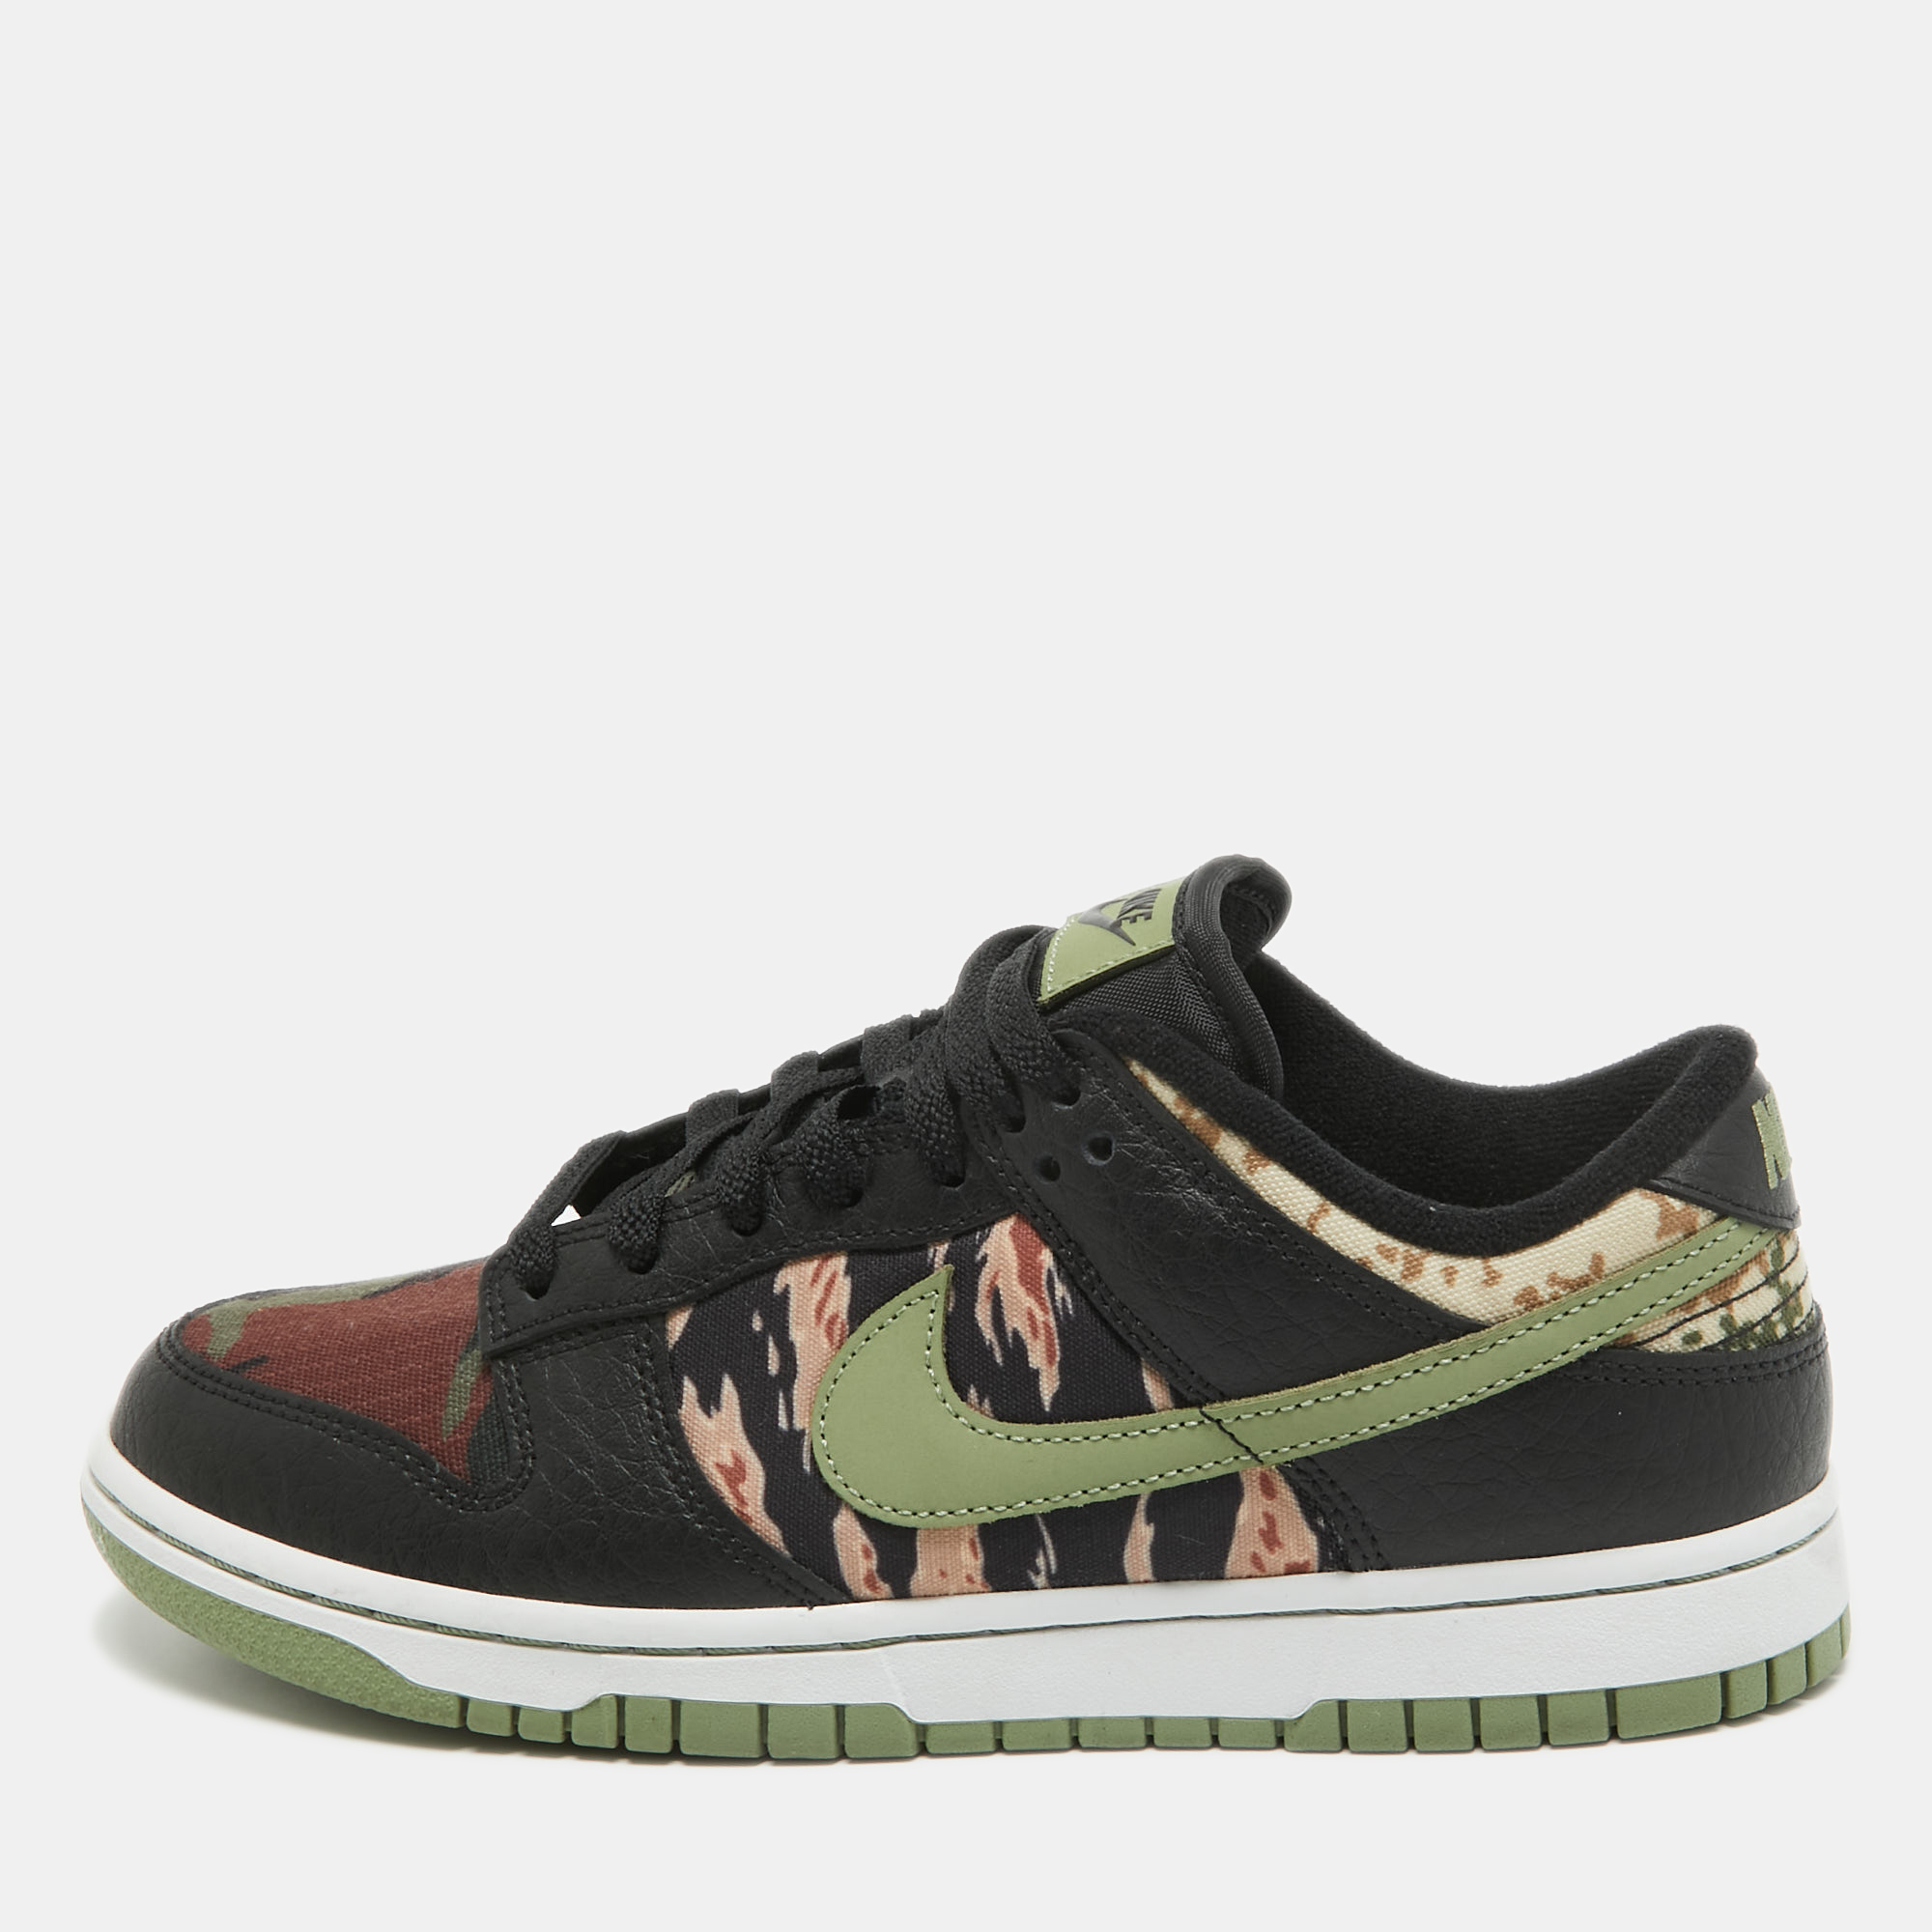 

Nike Multicolor Canvas and Leather Dunk Low SE Camo Sneakers Size